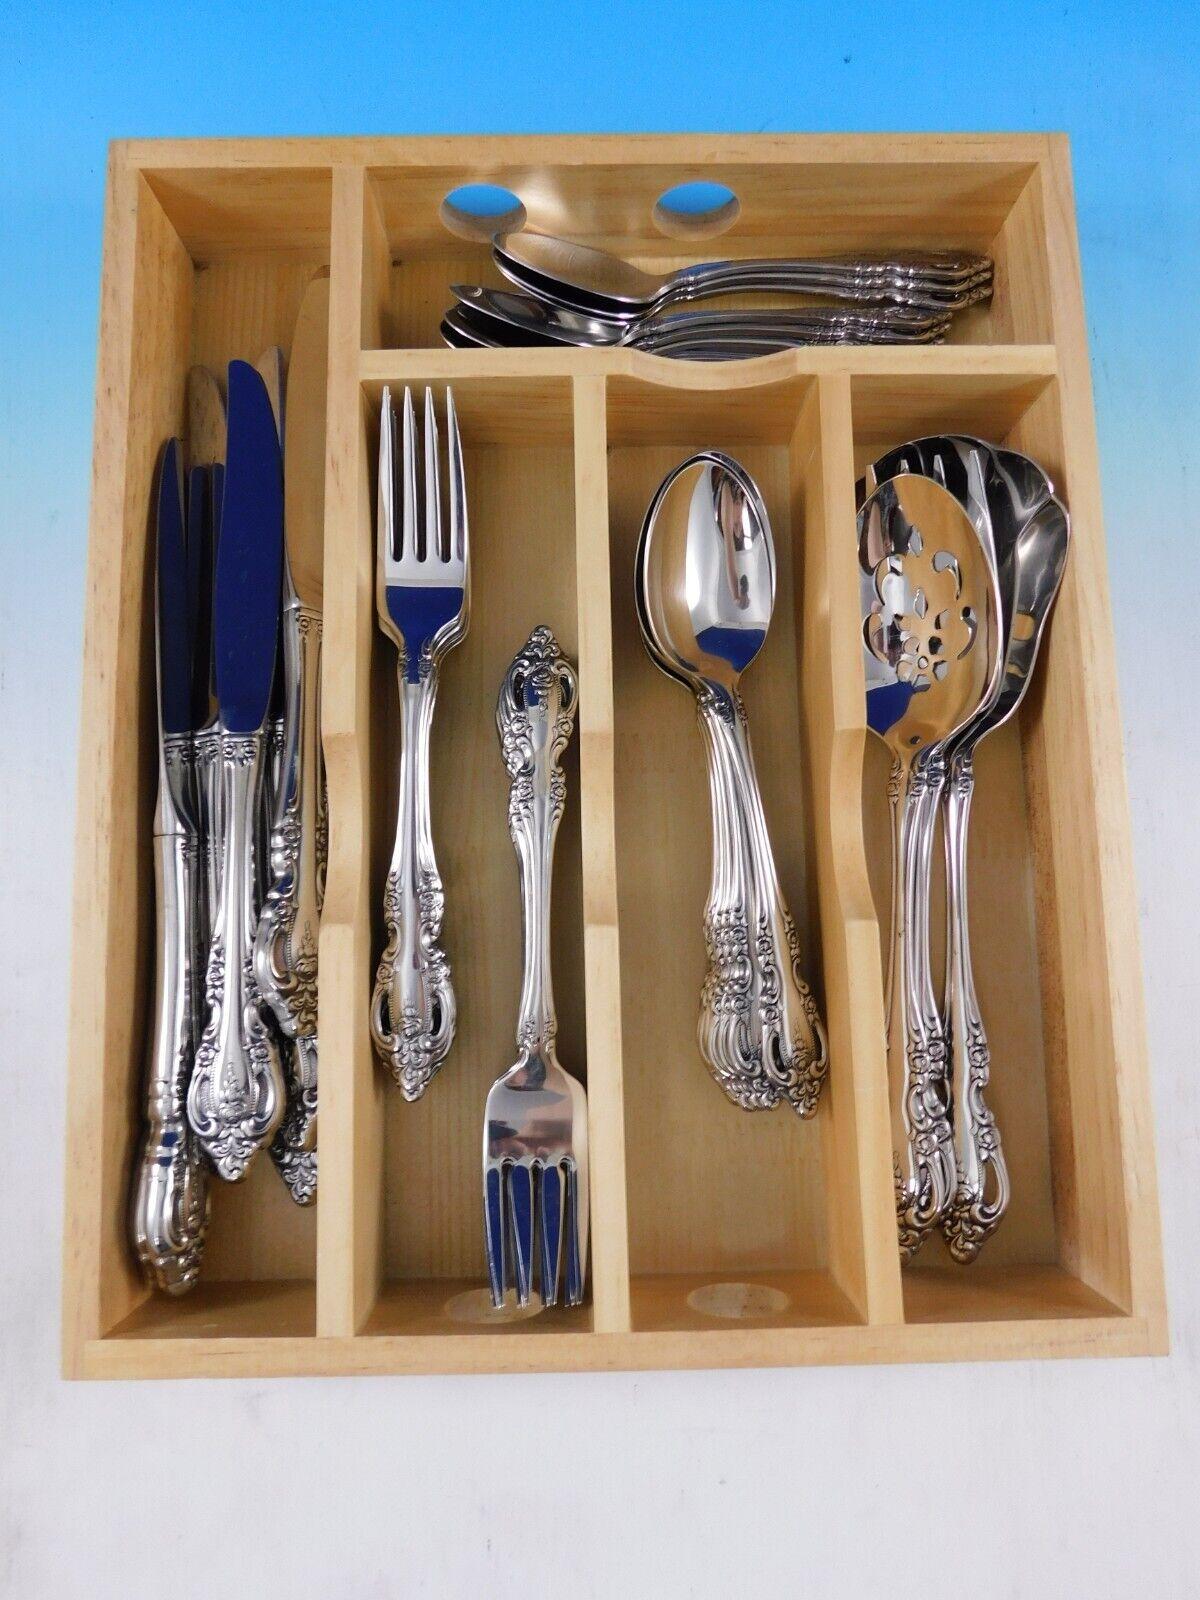 Brahms by Oneida Stainless Steel Flatware set, 43 pieces. This set includes:

8 Knives, 9 1/8